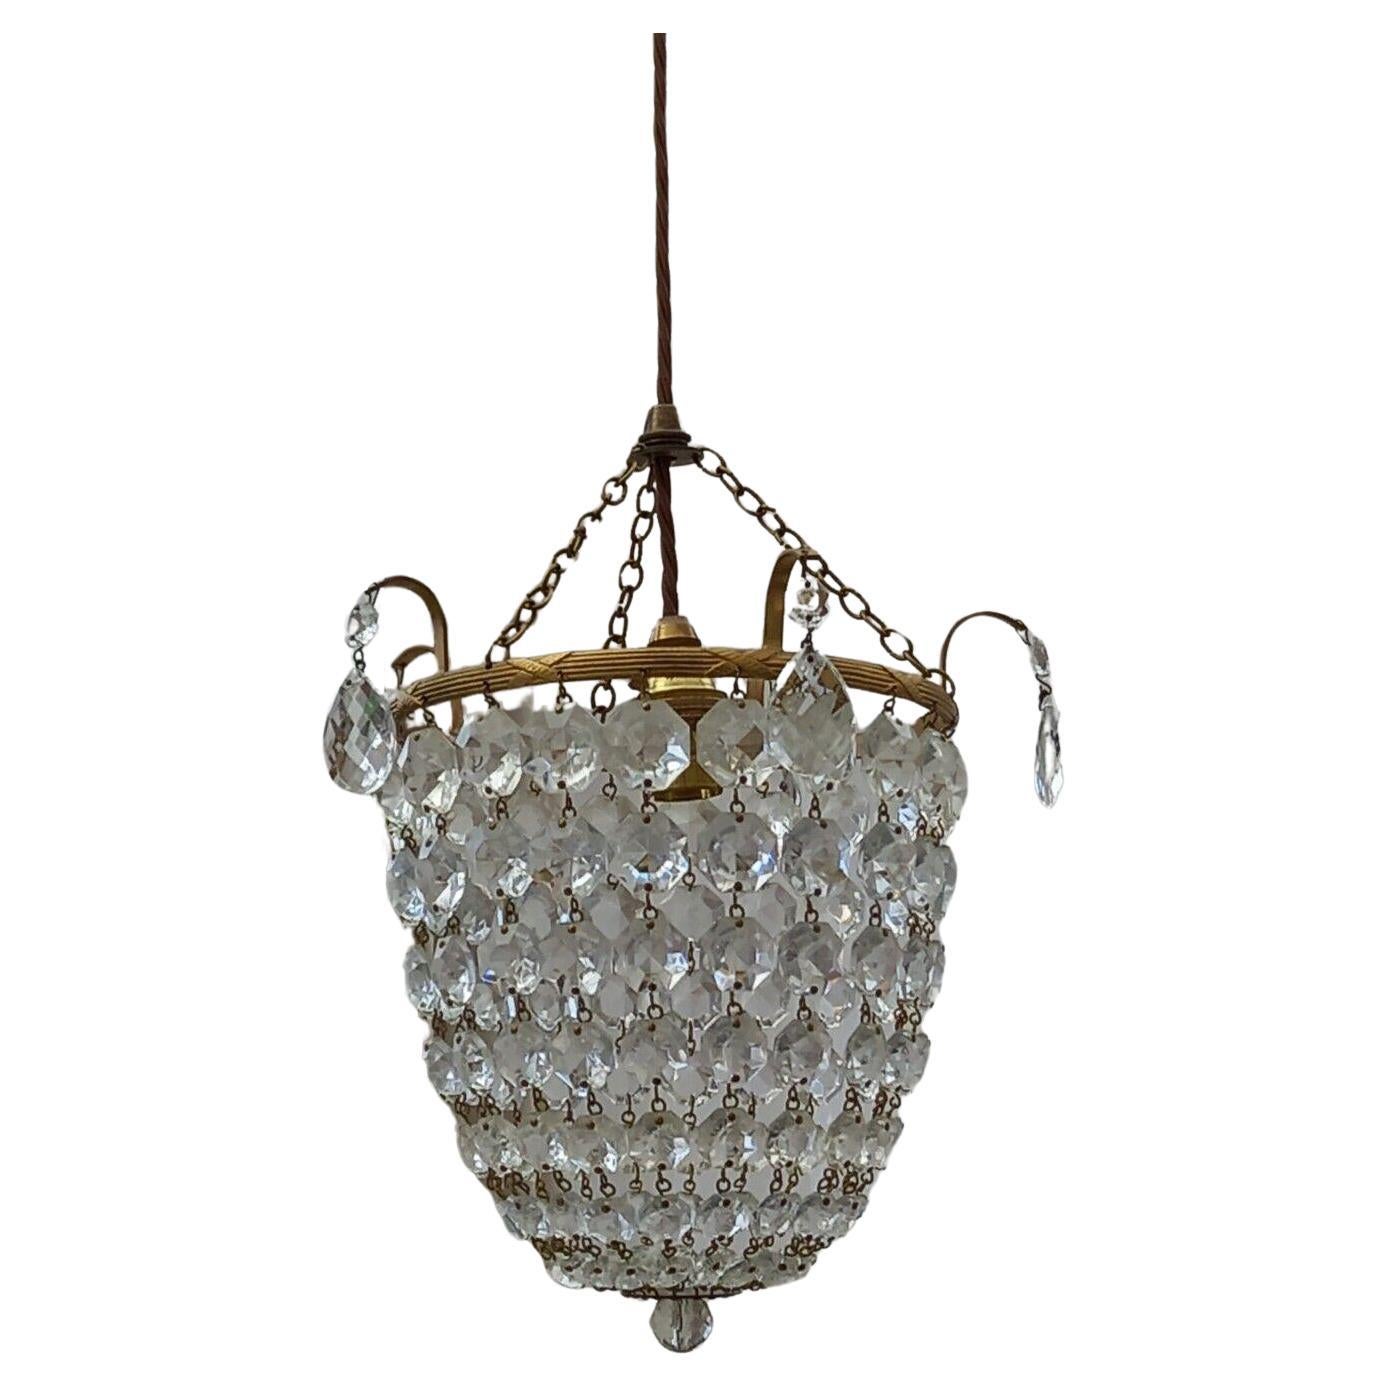 19thc British Empire Bronze with Cut Crystal Lantern style Pendant/ Chandelier For Sale